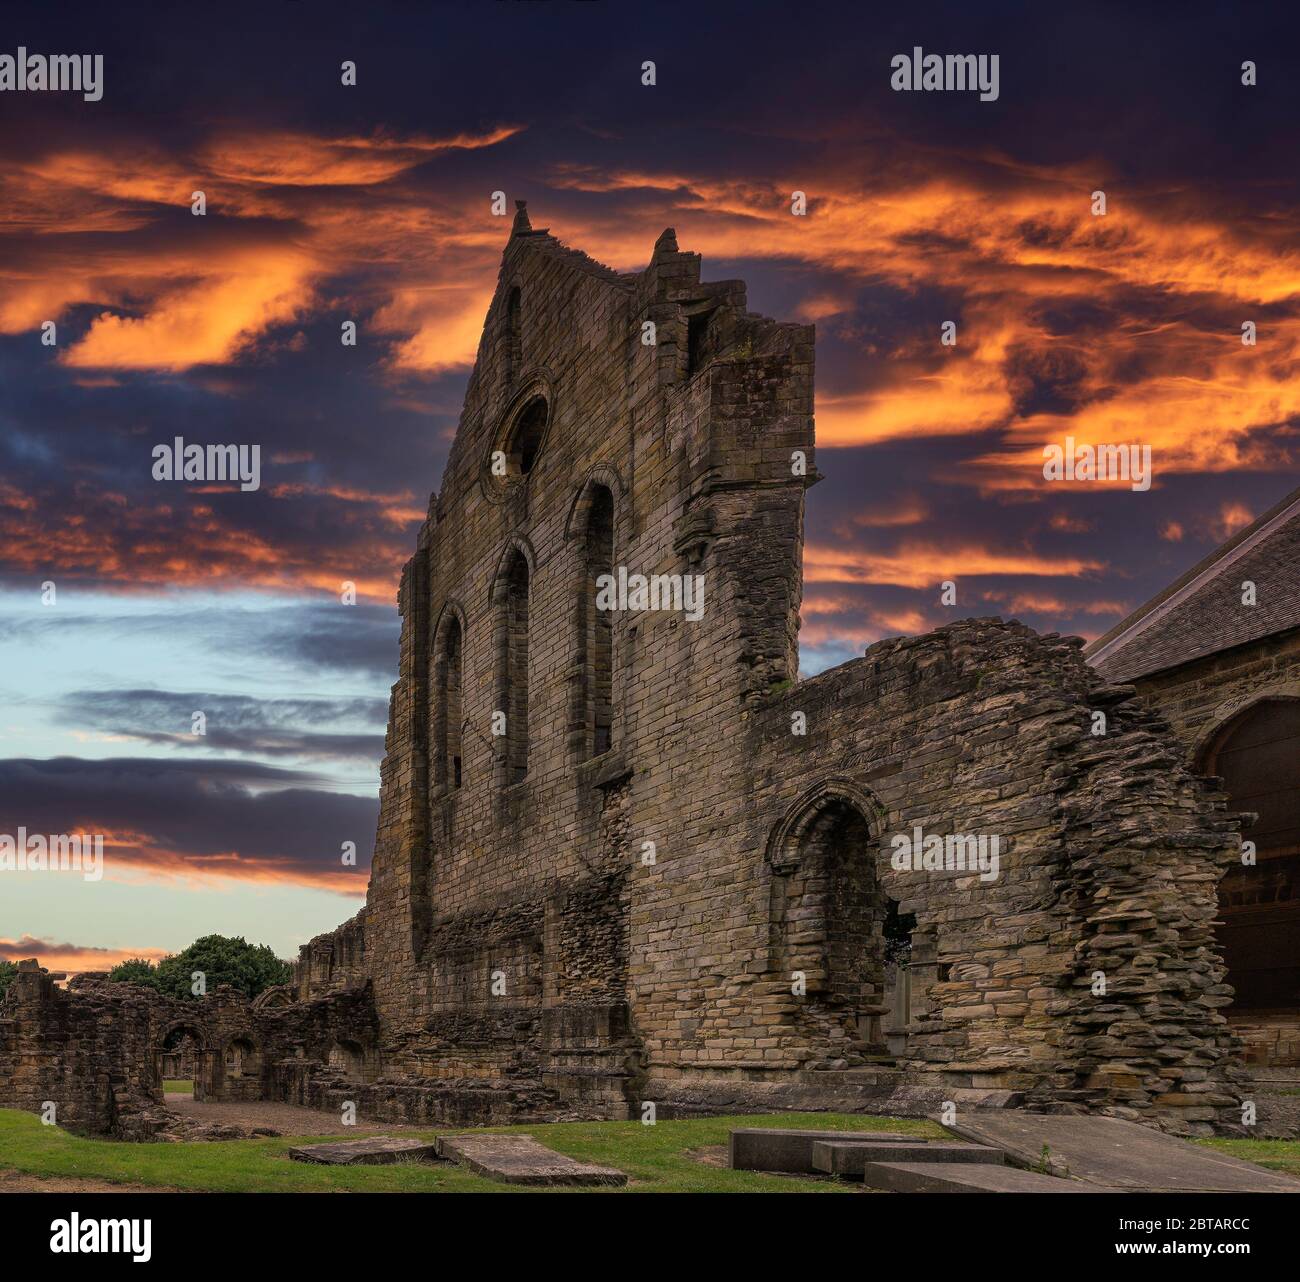 The Old Transept Ancient Ruins Kilwinning Abbey Scotland thought to be dated arround 1160's. Impressive ruins at sunset. Stock Photo